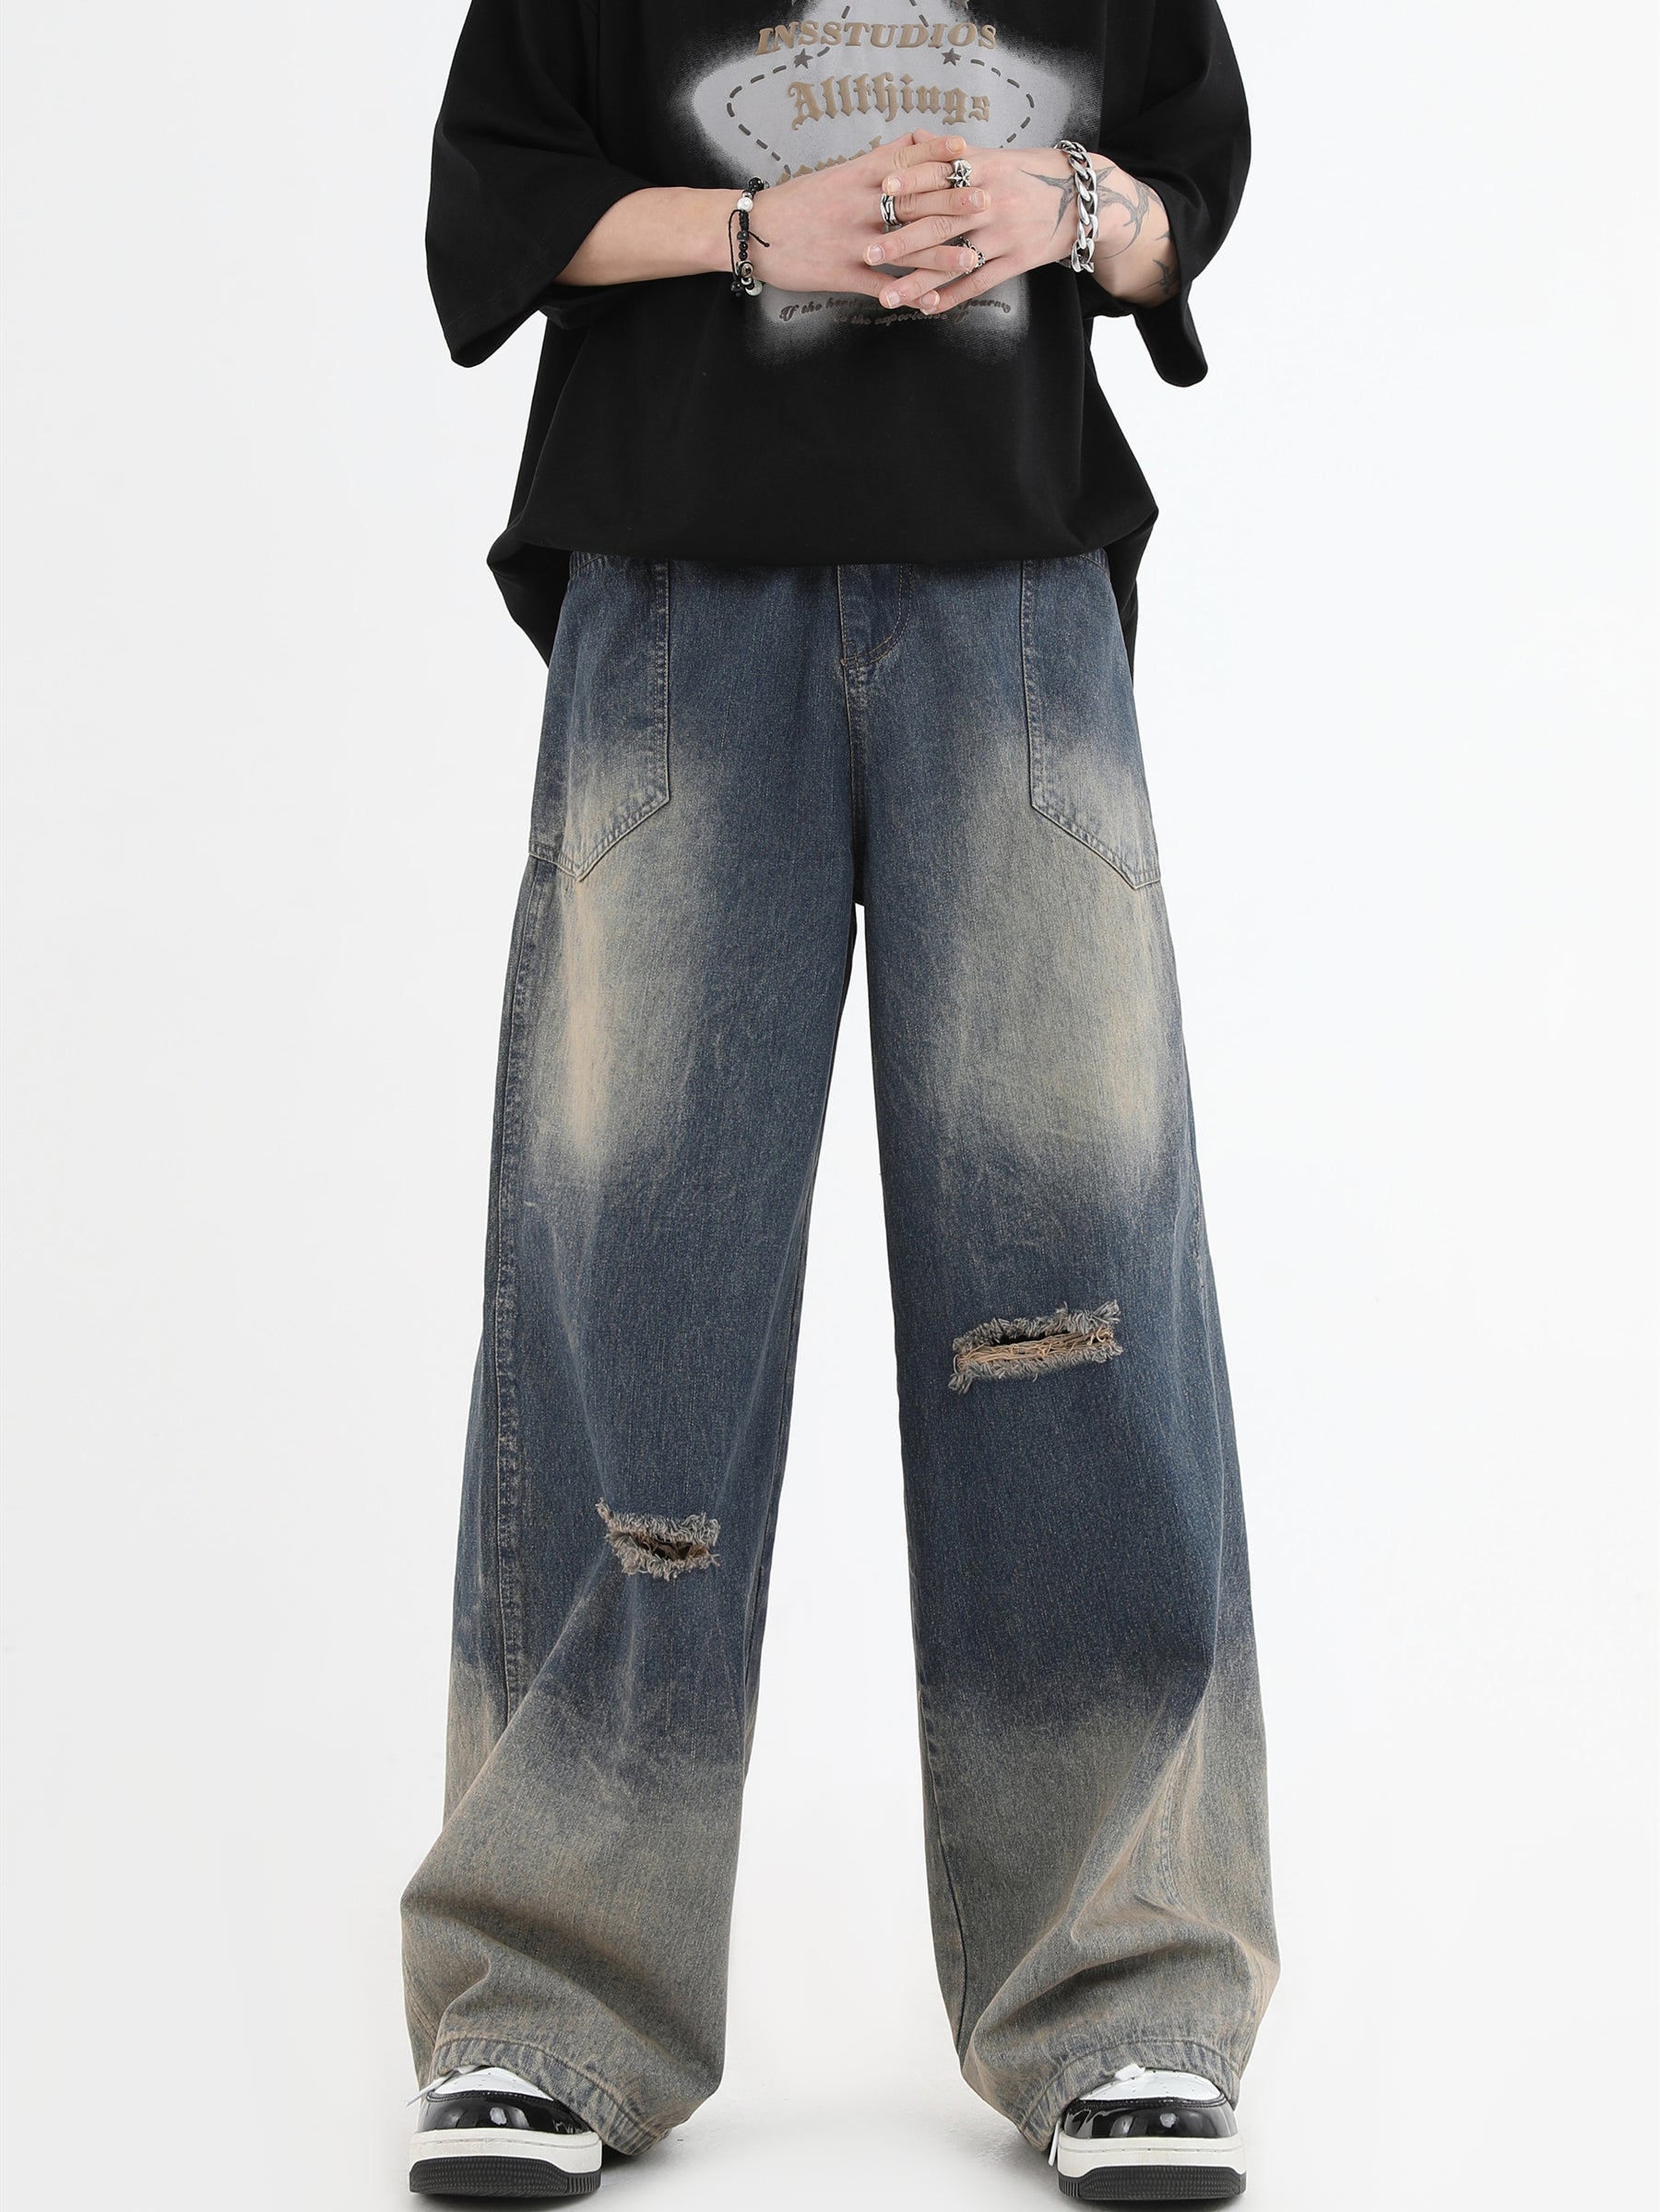 Vintage American Cut Washed Jeans - chiclara